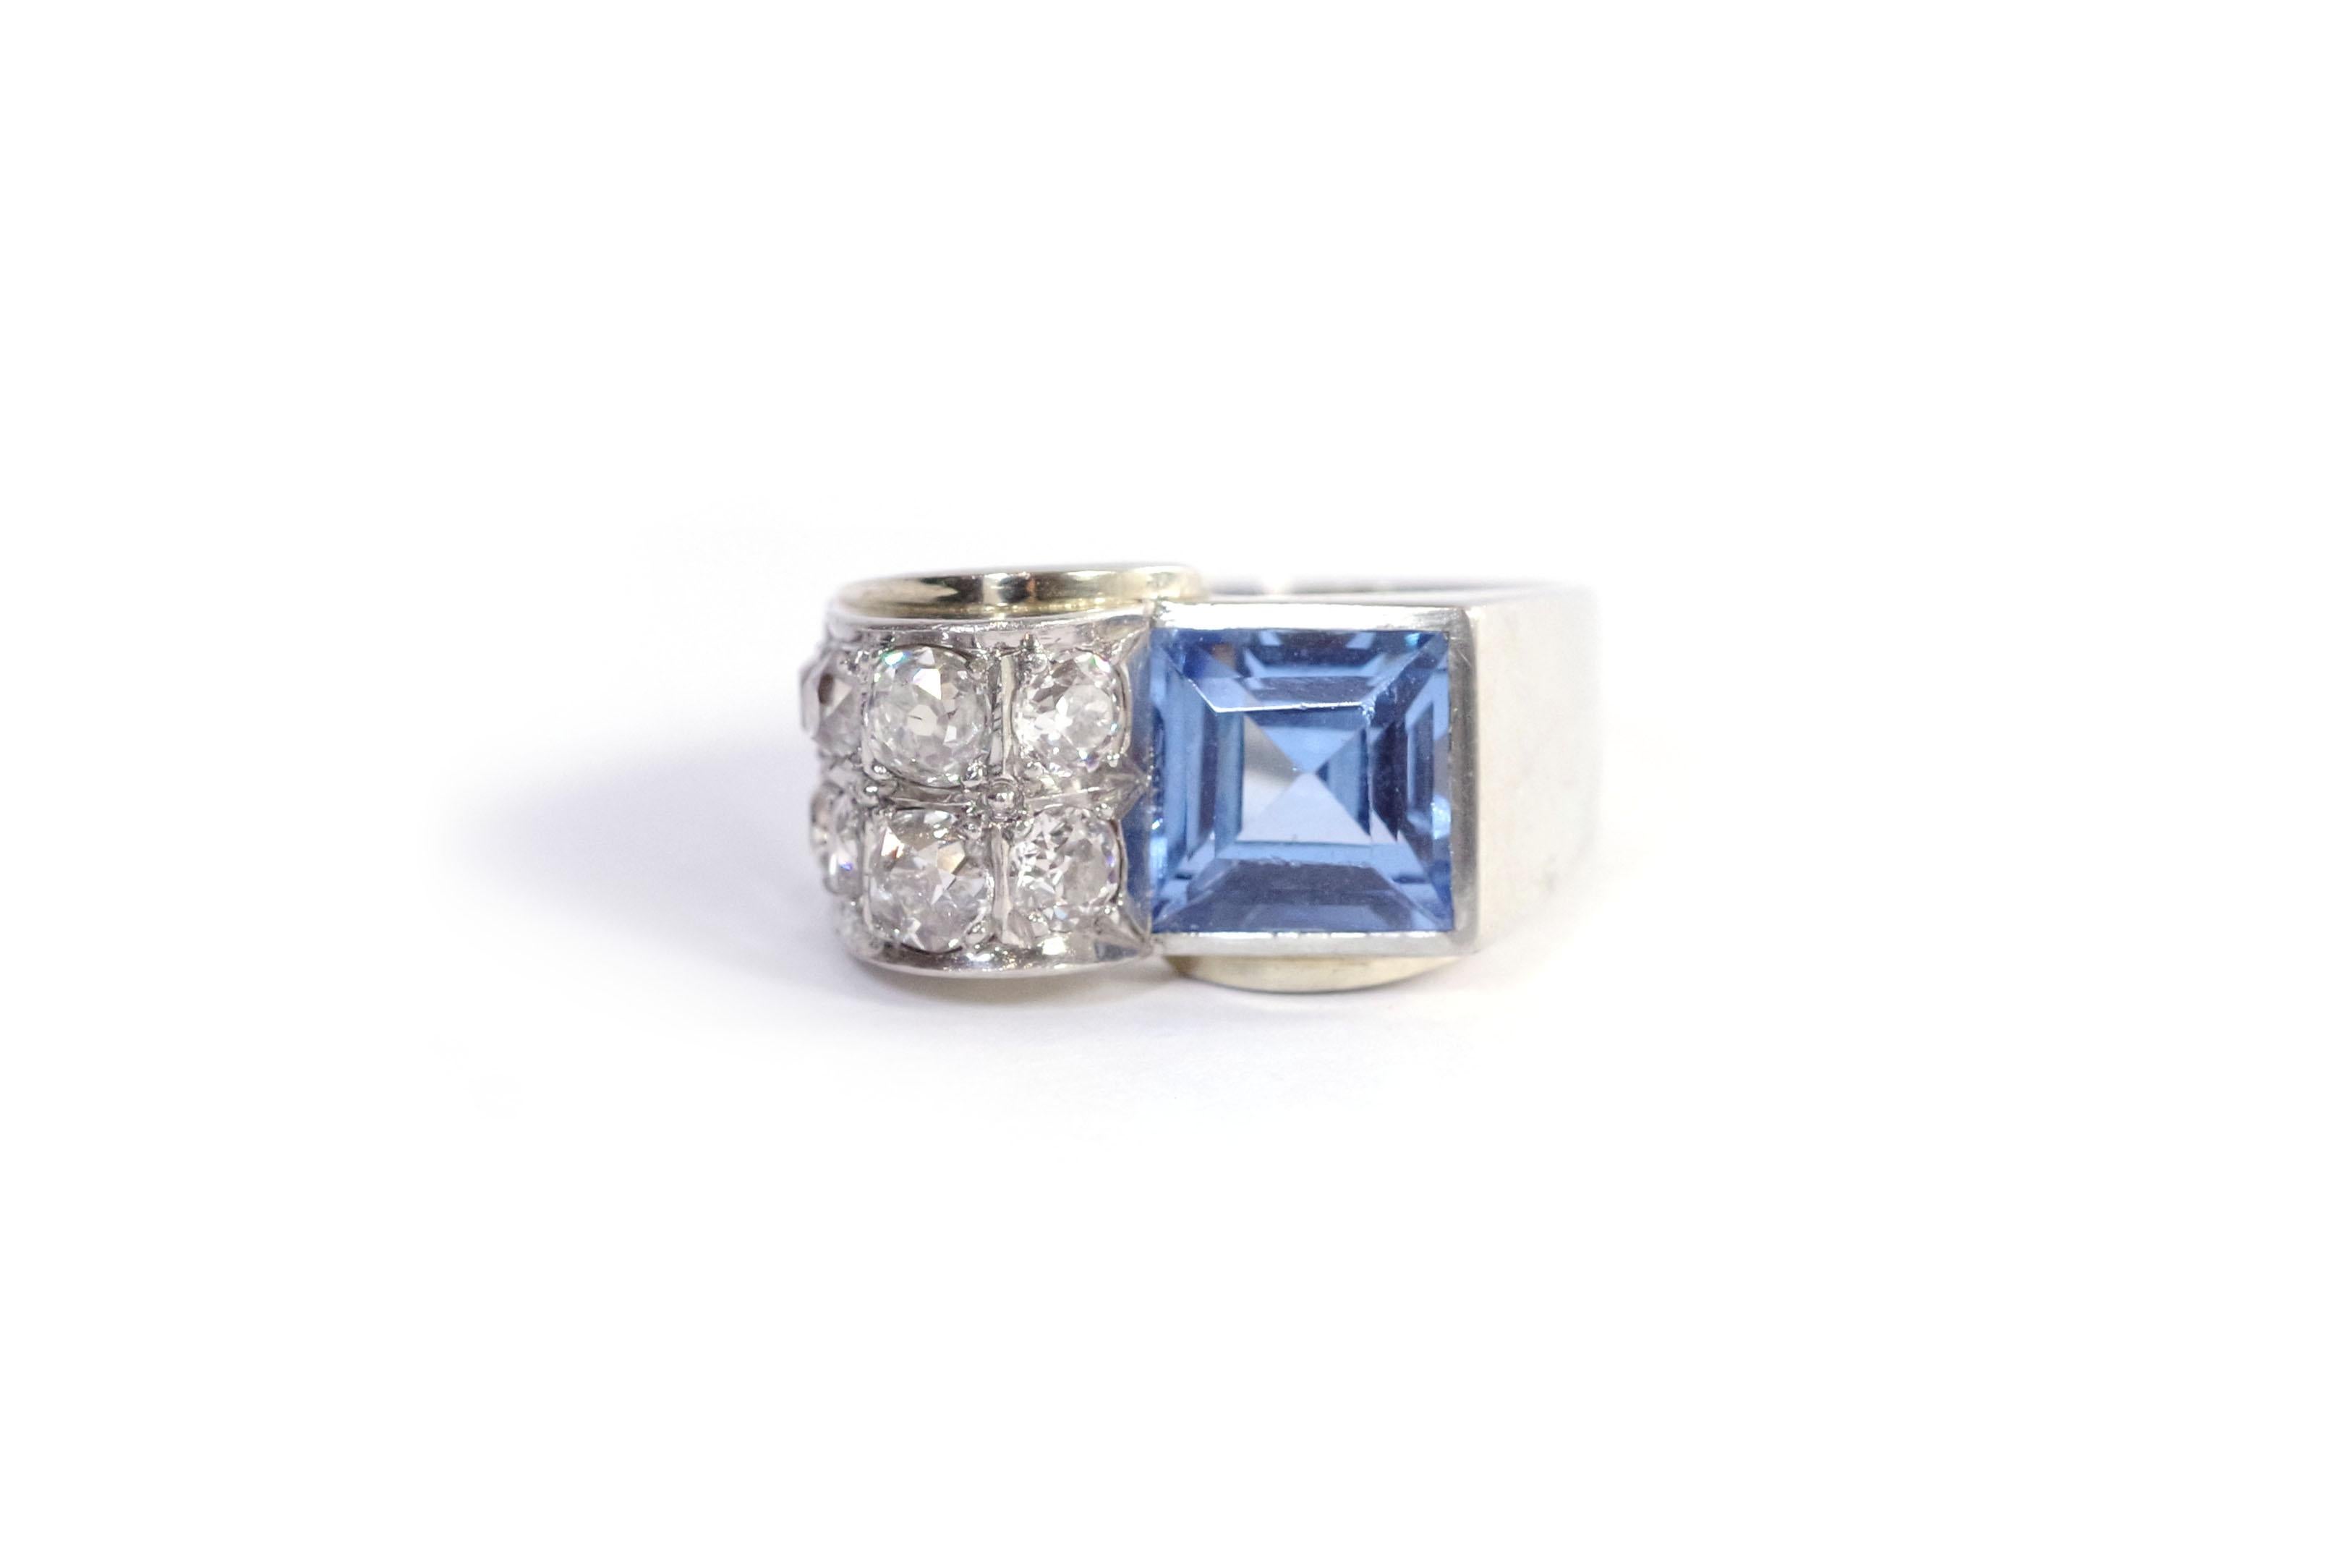 Tank ring with diamonds in 18-karat white gold and platinum. Tank ring set with a synthetic blue spinel of square cut. The spinel faces two lines of four old-cut diamonds (eight diamonds in total) set on a raised roll. The ring has harmonious